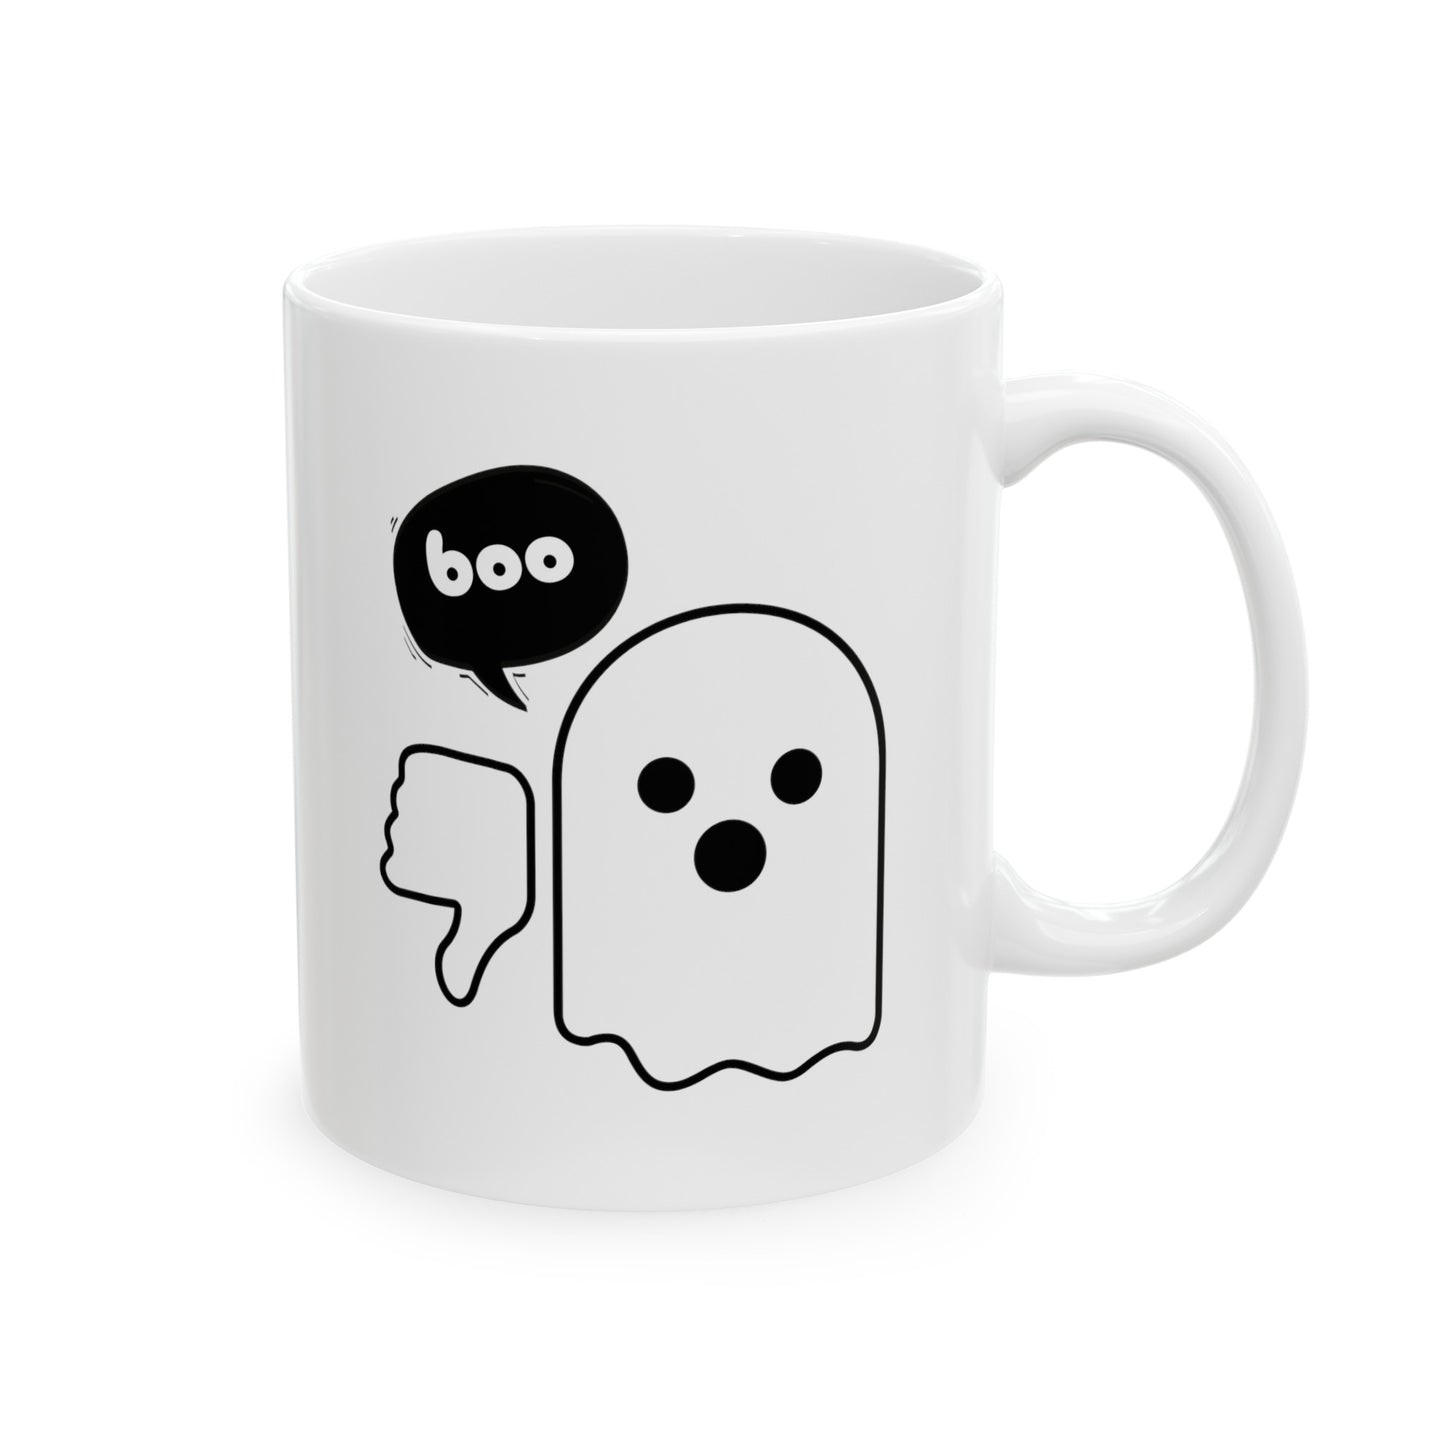 Boo Ghost Of Disapproval 11oz white funny large coffee mug gift for halloween spooky season friend disapproving waveywares wavey wares wavywares wavy wares